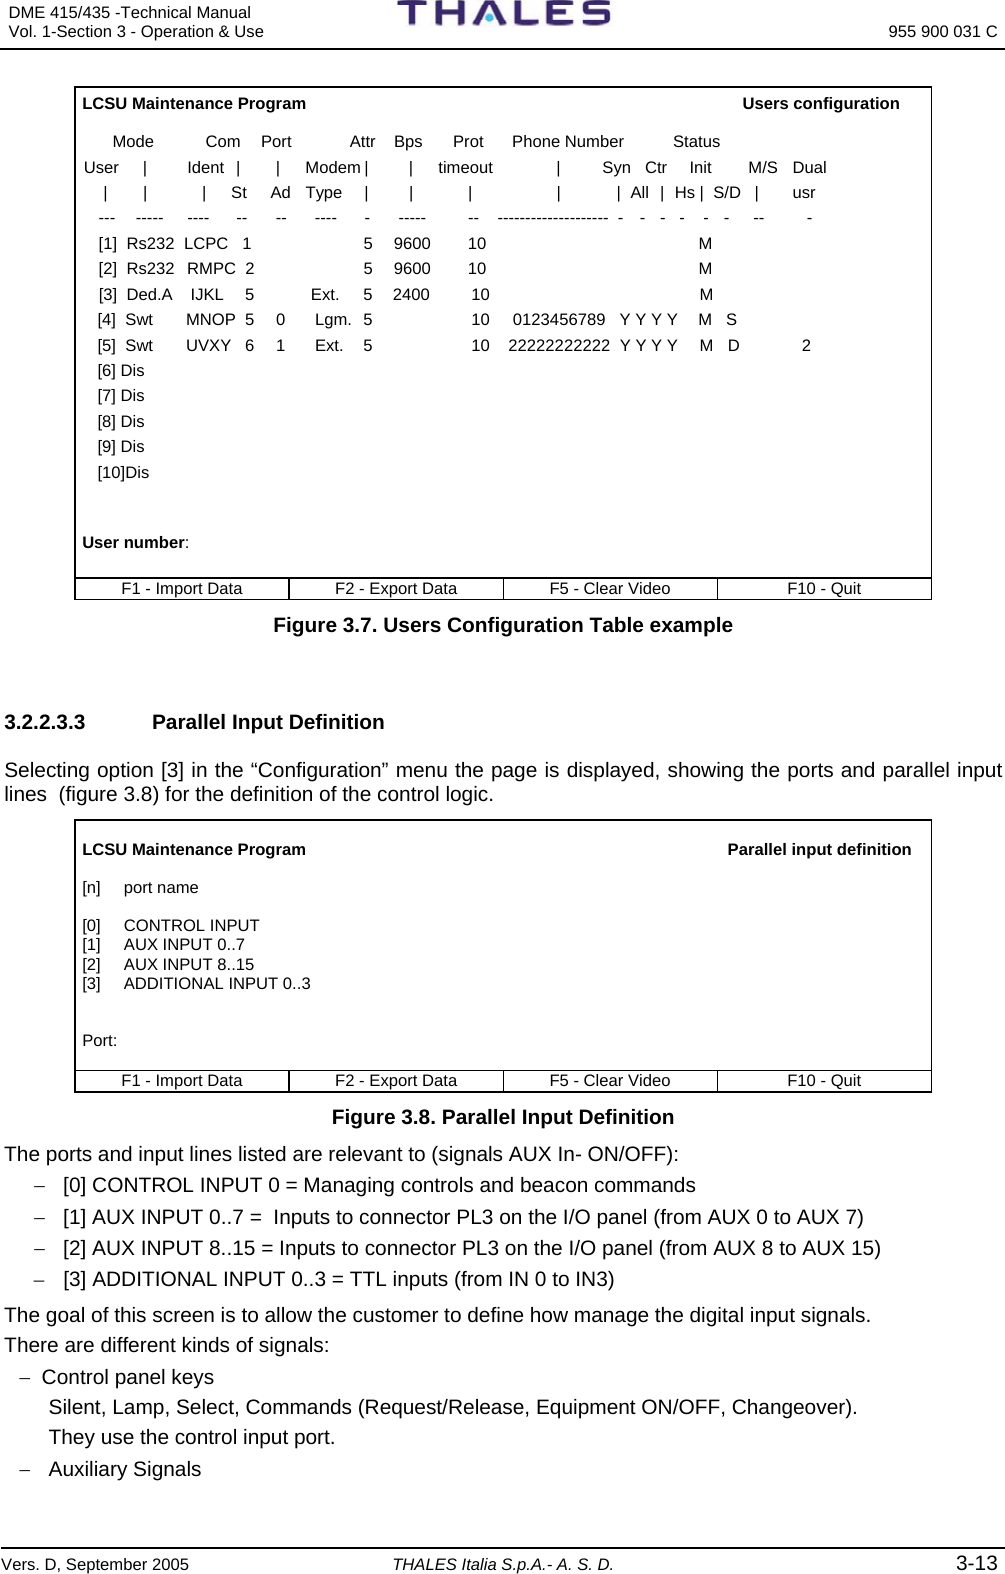 DME 415/435 -Technical Manual  Vol. 1-Section 3 - Operation &amp; Use   955 900 031 C Vers. D, September 2005 THALES Italia S.p.A.- A. S. D. 3-13 LCSU Maintenance Program                                      Users configuration     Mode        Com  Port  Attr   Bps   Prot     Phone Number     Status User   |    Ident   |    |   Modem |    |    timeout        |         Syn   Ctr   Init   M/S   Dual  |     |      |     St     Ad   Type   |    |      |           |            |  All  |  Hs |   S/D  |    usr ---   -----   ----   --   --   ----   -   -----   --   --------------------  -    -   -   -    -   -   --     -   [1]  Rs232  LCPC   1               5   9600    10                                  M [2]  Rs232   RMPC  2               5   9600    10                                  M [3]  Ded.A    IJKL     5      Ext.   5    2400      10                                M   [4]  Swt      MNOP  5    0  Lgm.   5           10     0123456789   Y Y Y Y   M   S  [5]  Swt      UVXY   6    1   Ext.    5           10    22222222222  Y Y Y Y   M   D       2  [6] Dis  [7] Dis  [8] Dis  [9] Dis  [10]Dis   User number:  F1 - Import Data  F2 - Export Data  F5 - Clear Video  F10 - Quit Figure 3.7. Users Configuration Table example   3.2.2.3.3    Parallel Input Definition Selecting option [3] in the “Configuration” menu the page is displayed, showing the ports and parallel input lines  (figure 3.8) for the definition of the control logic.  LCSU Maintenance Program                                     Parallel input definition  [n]     port name  [0]     CONTROL INPUT  [1]     AUX INPUT 0..7 [2]     AUX INPUT 8..15 [3]     ADDITIONAL INPUT 0..3   Port:  F1 - Import Data  F2 - Export Data  F5 - Clear Video  F10 - Quit Figure 3.8. Parallel Input Definition The ports and input lines listed are relevant to (signals AUX In- ON/OFF): −  [0] CONTROL INPUT 0 = Managing controls and beacon commands −  [1] AUX INPUT 0..7 =  Inputs to connector PL3 on the I/O panel (from AUX 0 to AUX 7) −  [2] AUX INPUT 8..15 = Inputs to connector PL3 on the I/O panel (from AUX 8 to AUX 15) –  [3] ADDITIONAL INPUT 0..3 = TTL inputs (from IN 0 to IN3) The goal of this screen is to allow the customer to define how manage the digital input signals. There are different kinds of signals: −  Control panel keys Silent, Lamp, Select, Commands (Request/Release, Equipment ON/OFF, Changeover). They use the control input port.  − Auxiliary Signals 